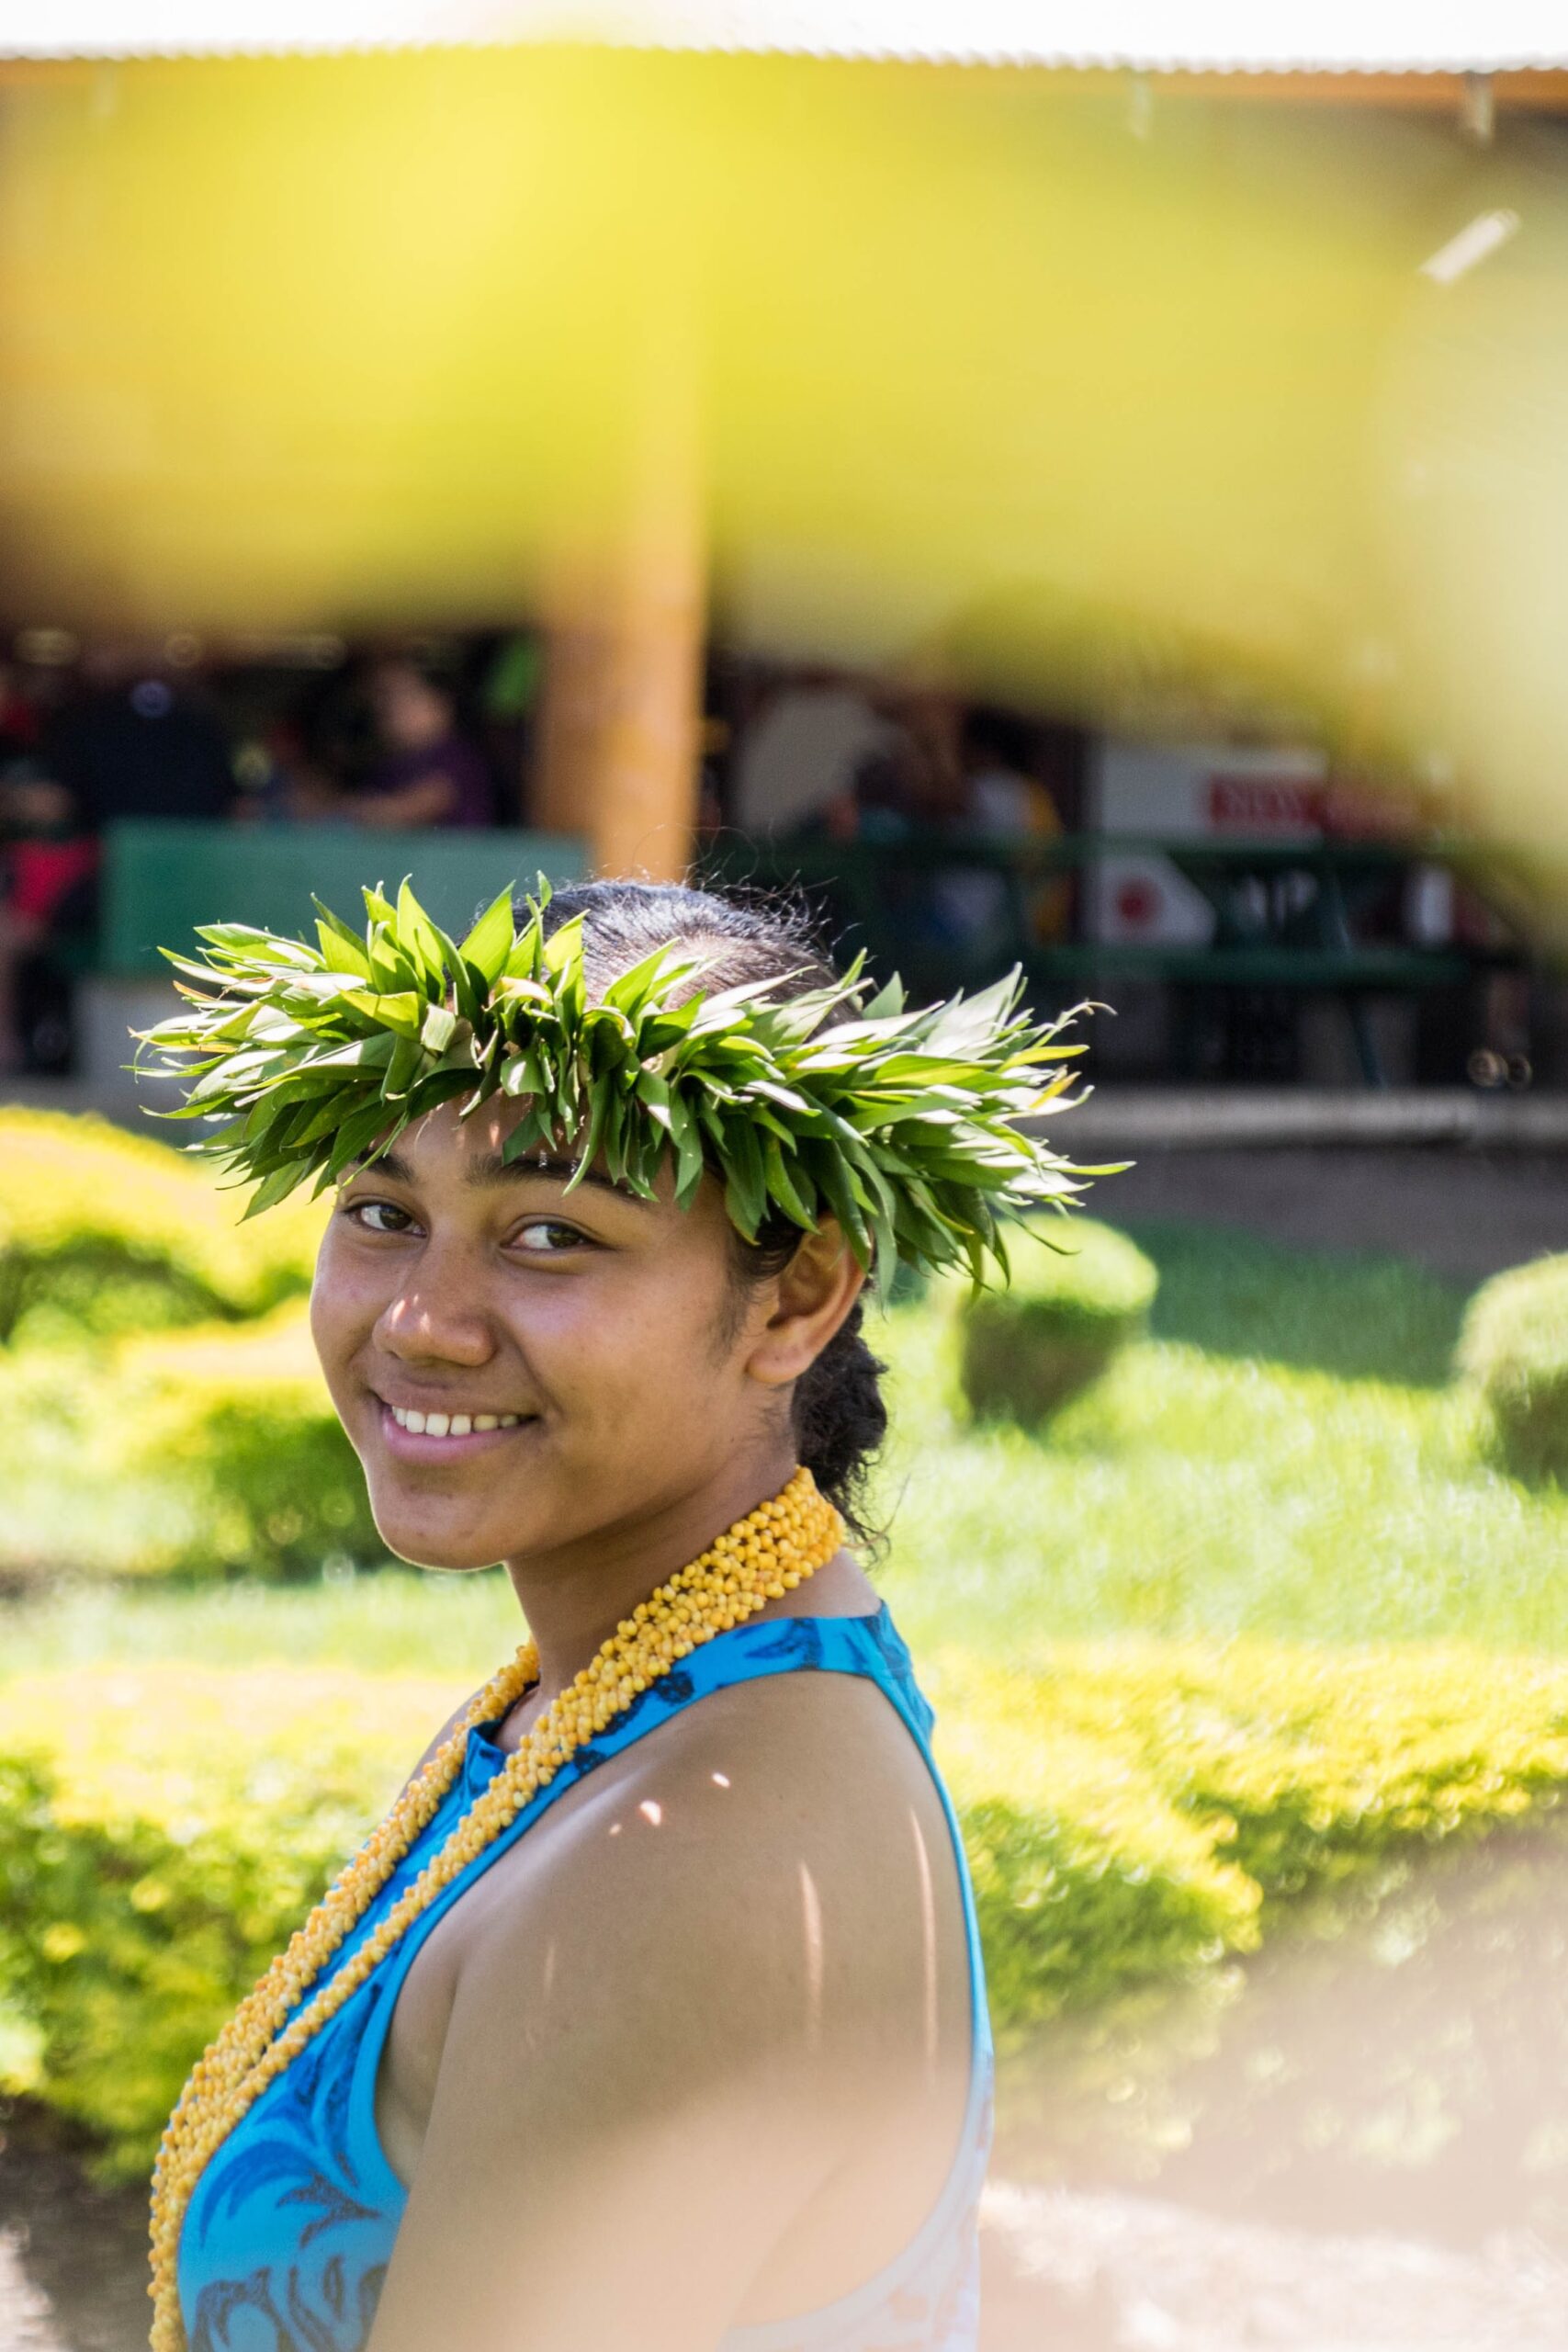 Family holidays in Fiji offer the opportunity for kids to learn about a foreign culture. (photo: Vijesh Datt)